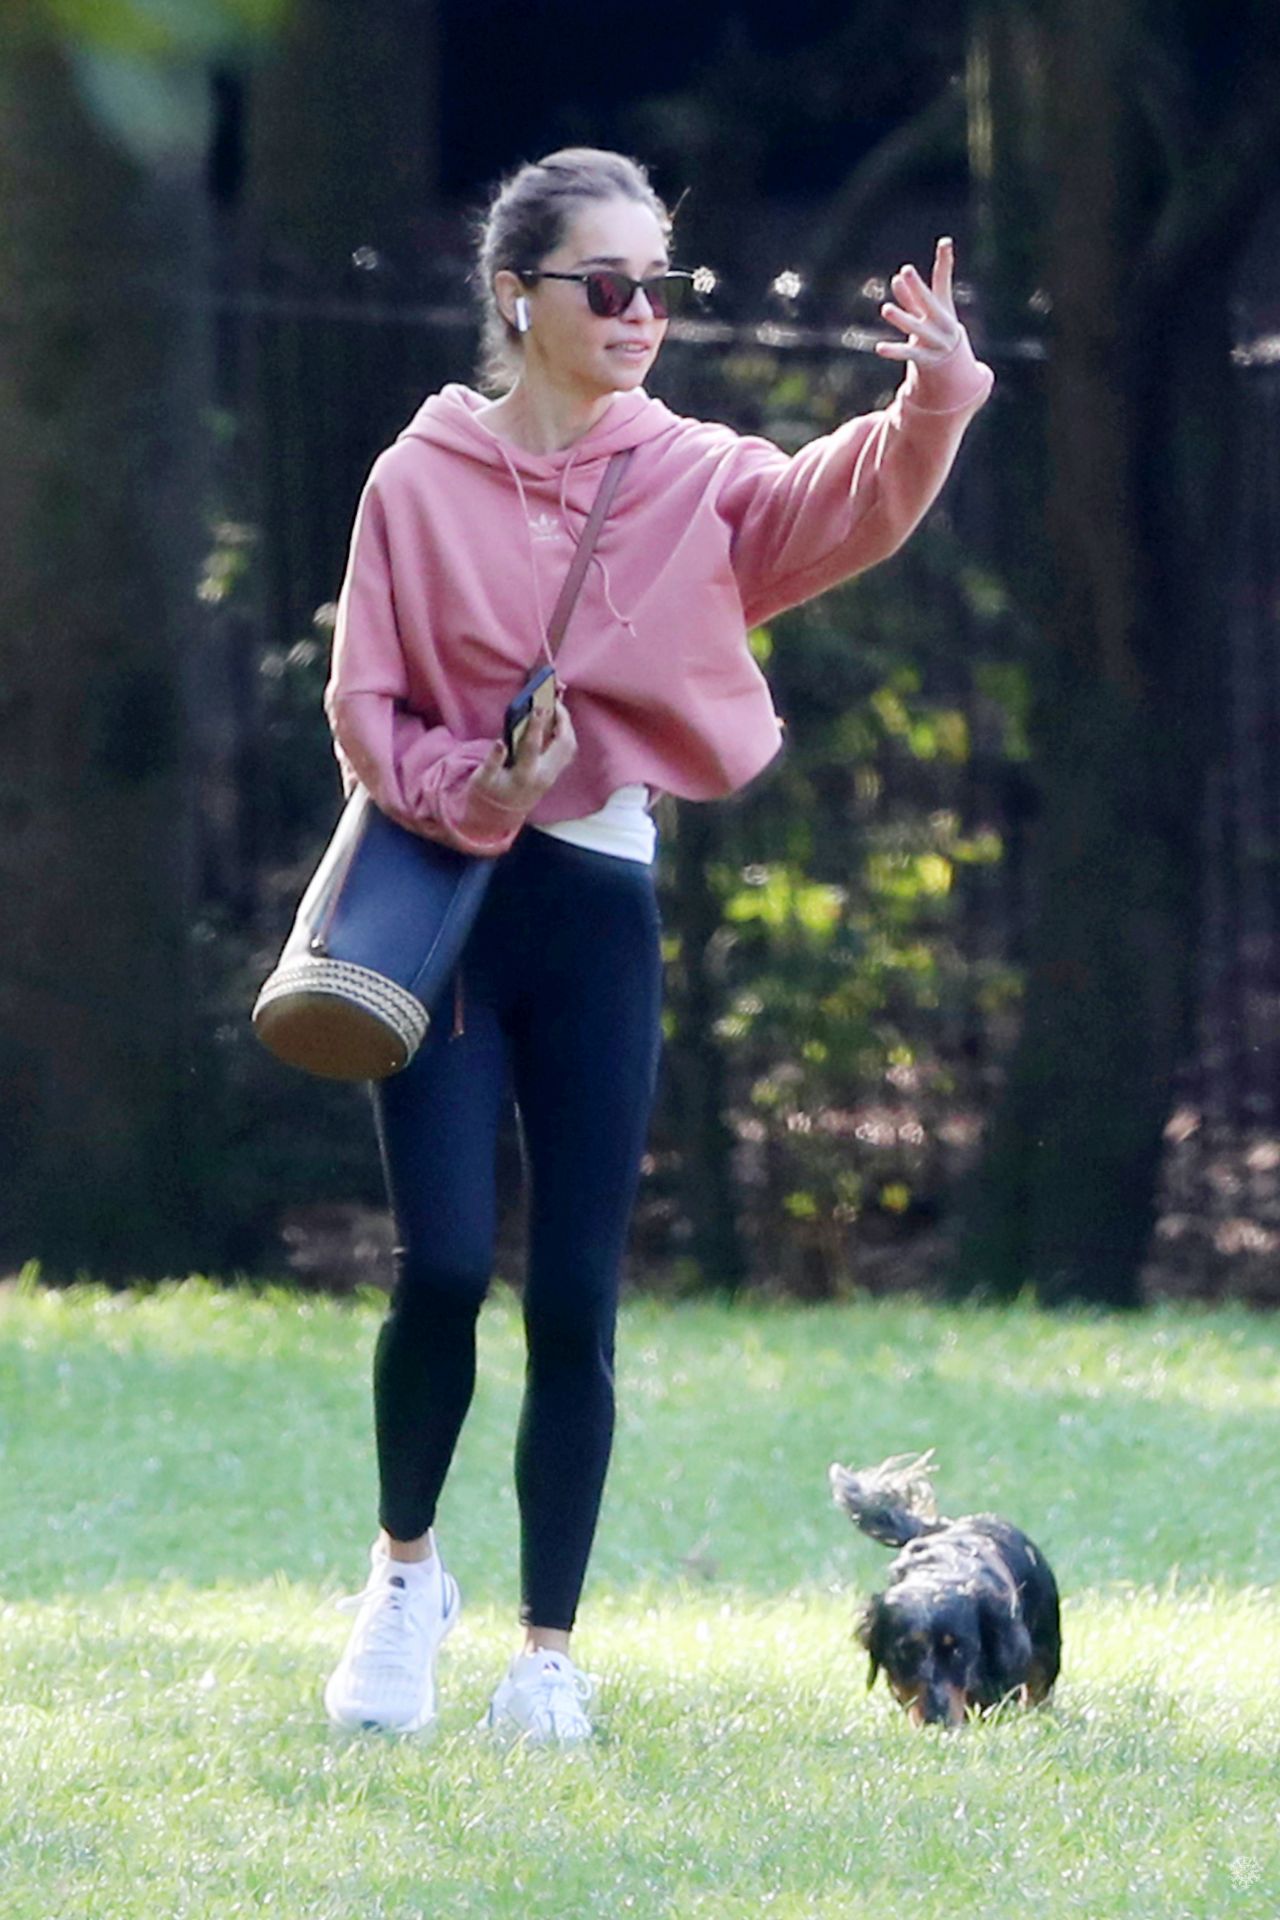 Emilia Clarke Wears Cute Summer Outfit While Walking Her Dog in